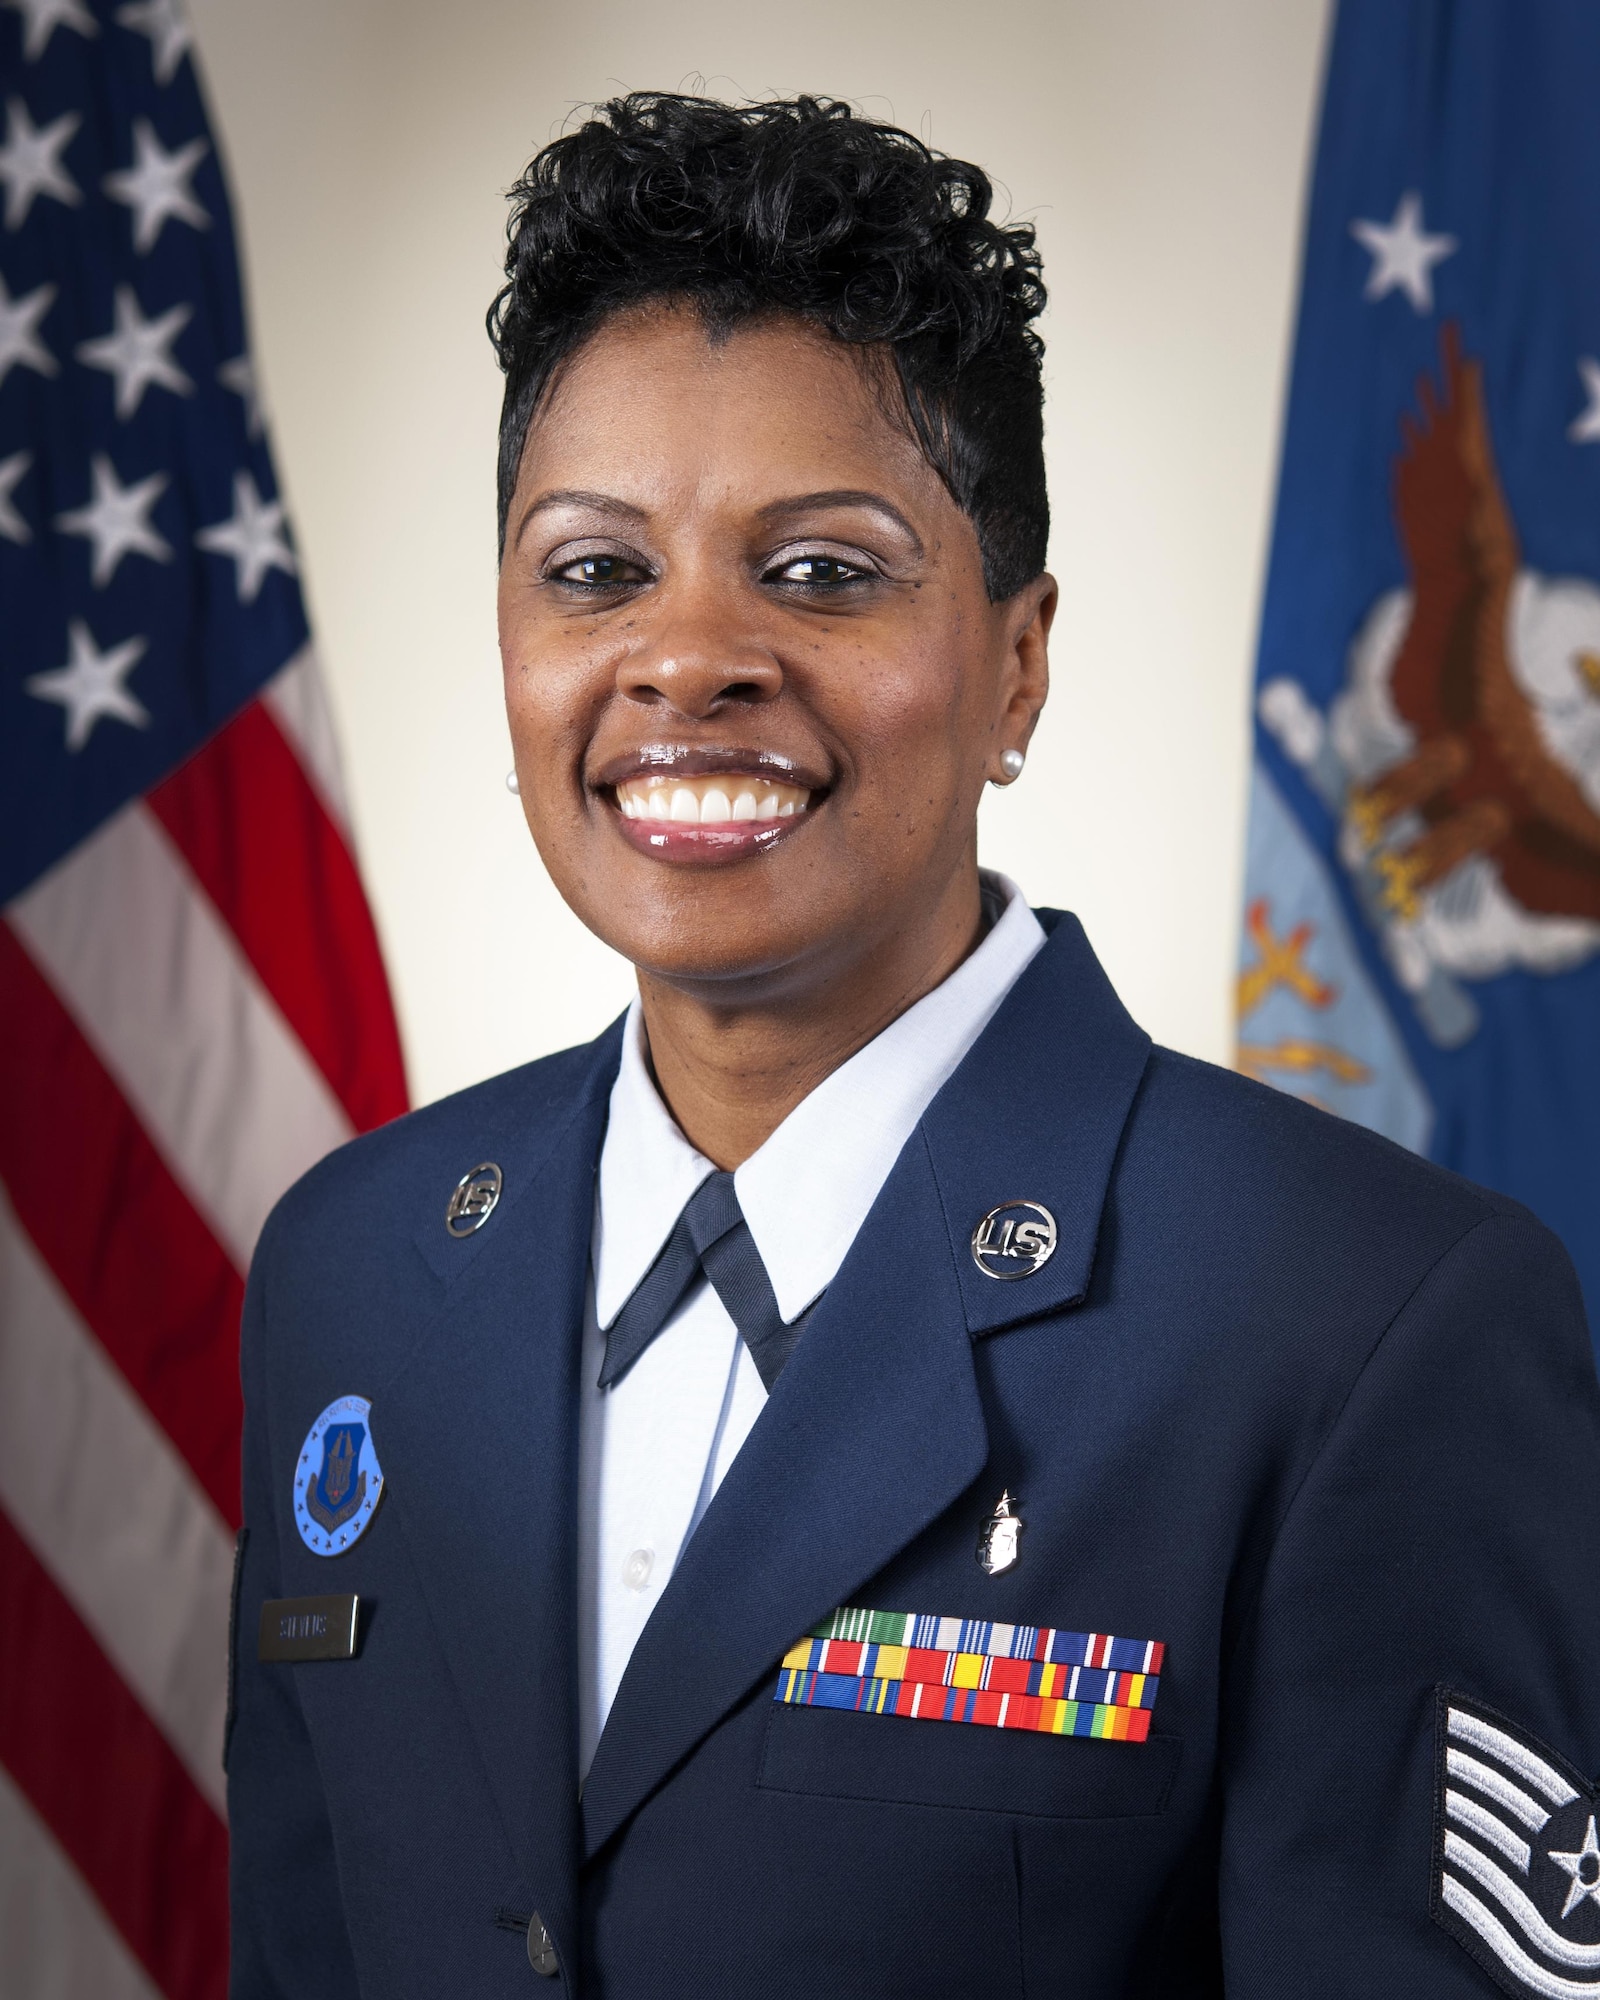 Tech. Sgt. Sharon Stevens, 434th Aerospace Medical Squadron dental assistant, poses for an official photo at Grissom Air Reserve Base, Ind., Oct. 2, 2016. Stevens recently accepted a job as an Air Force Reserve recruiter. (U.S. Air Force photo/Tech. Sgt. Benjamin Mota)